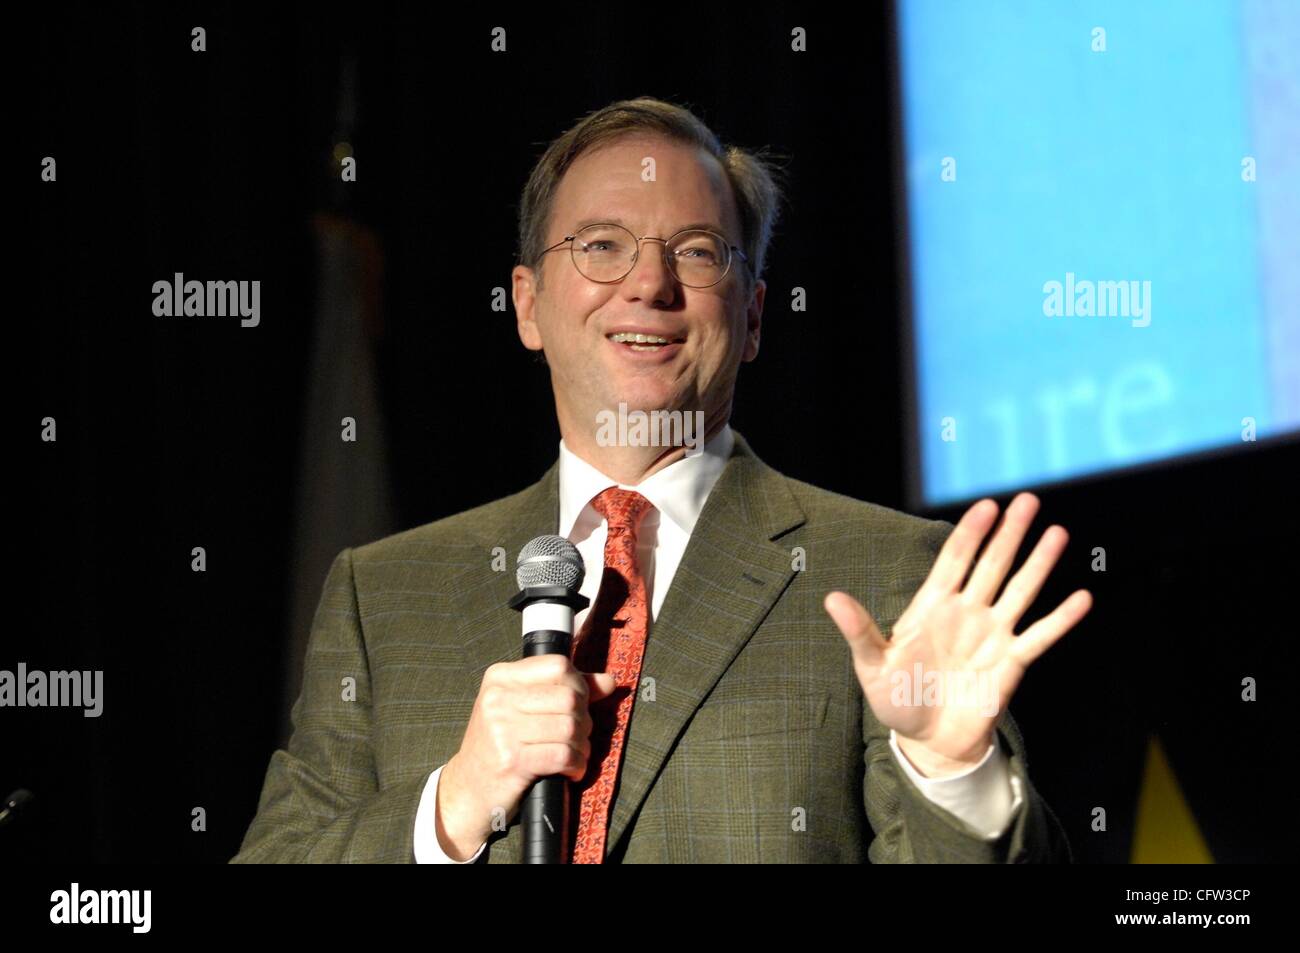 Feb 02, 2007 - San Jose, California, USA - Chief Executive Officer ERIC SCHMIDT addresses a gathering of Silicon Valley business and civic leaders at the San Jose McEnery Convention Center. (Credit Image: Â© Jerome Brunet/ZUMA Press) Stock Photo